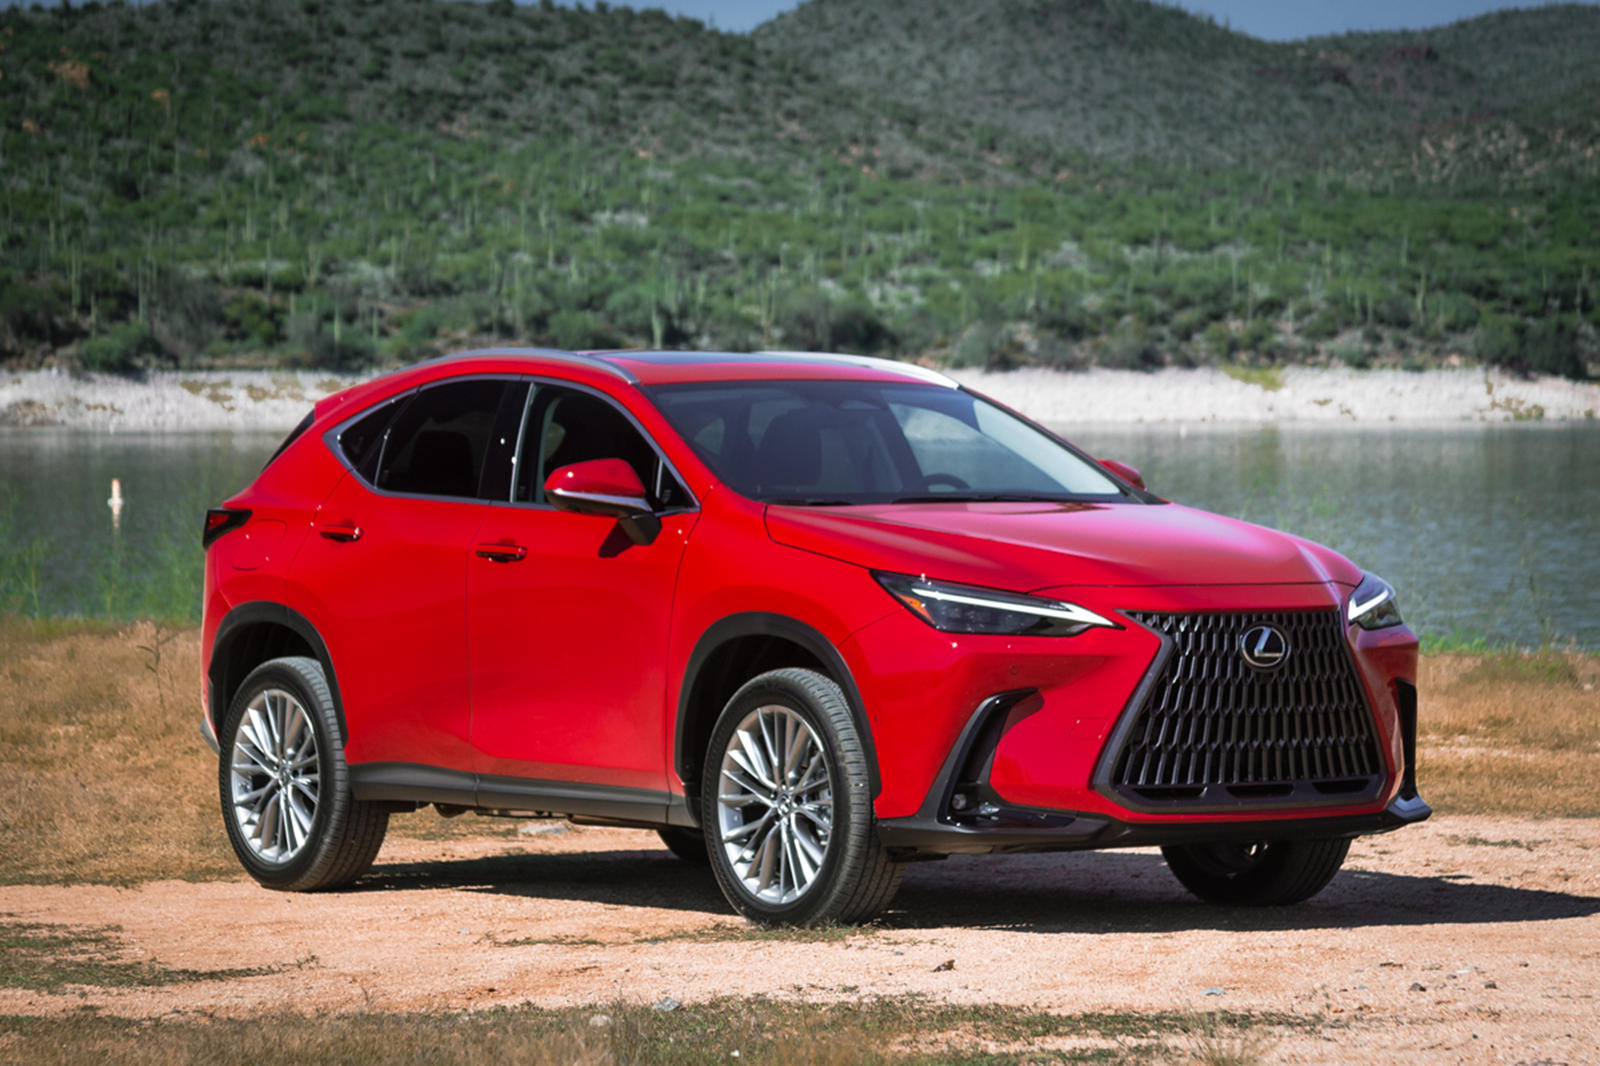 Lexus NX 250 Luxury for sale Used NX NX 250 Luxury near you in the US